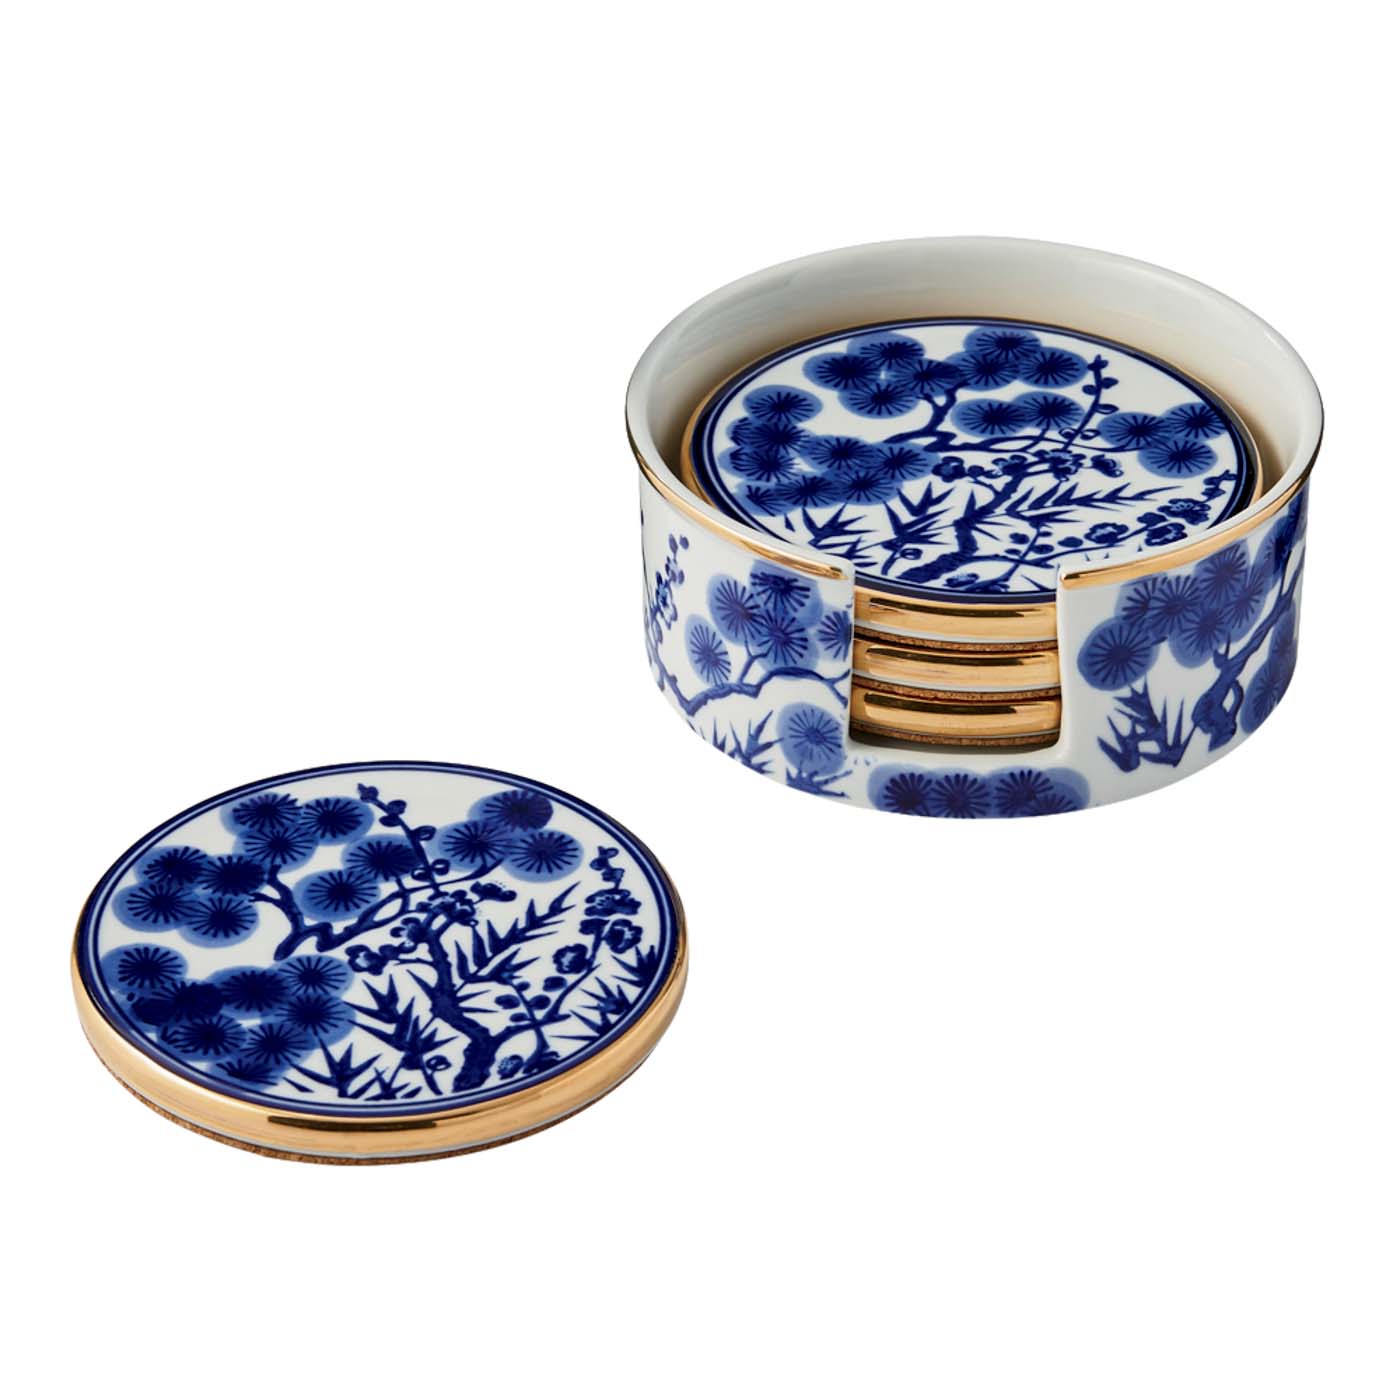 86 Sr2023 03 191 Chinoiserie Ceramic Coasters With Holder, Williams Sonoma Old Orchard 847 933 9803